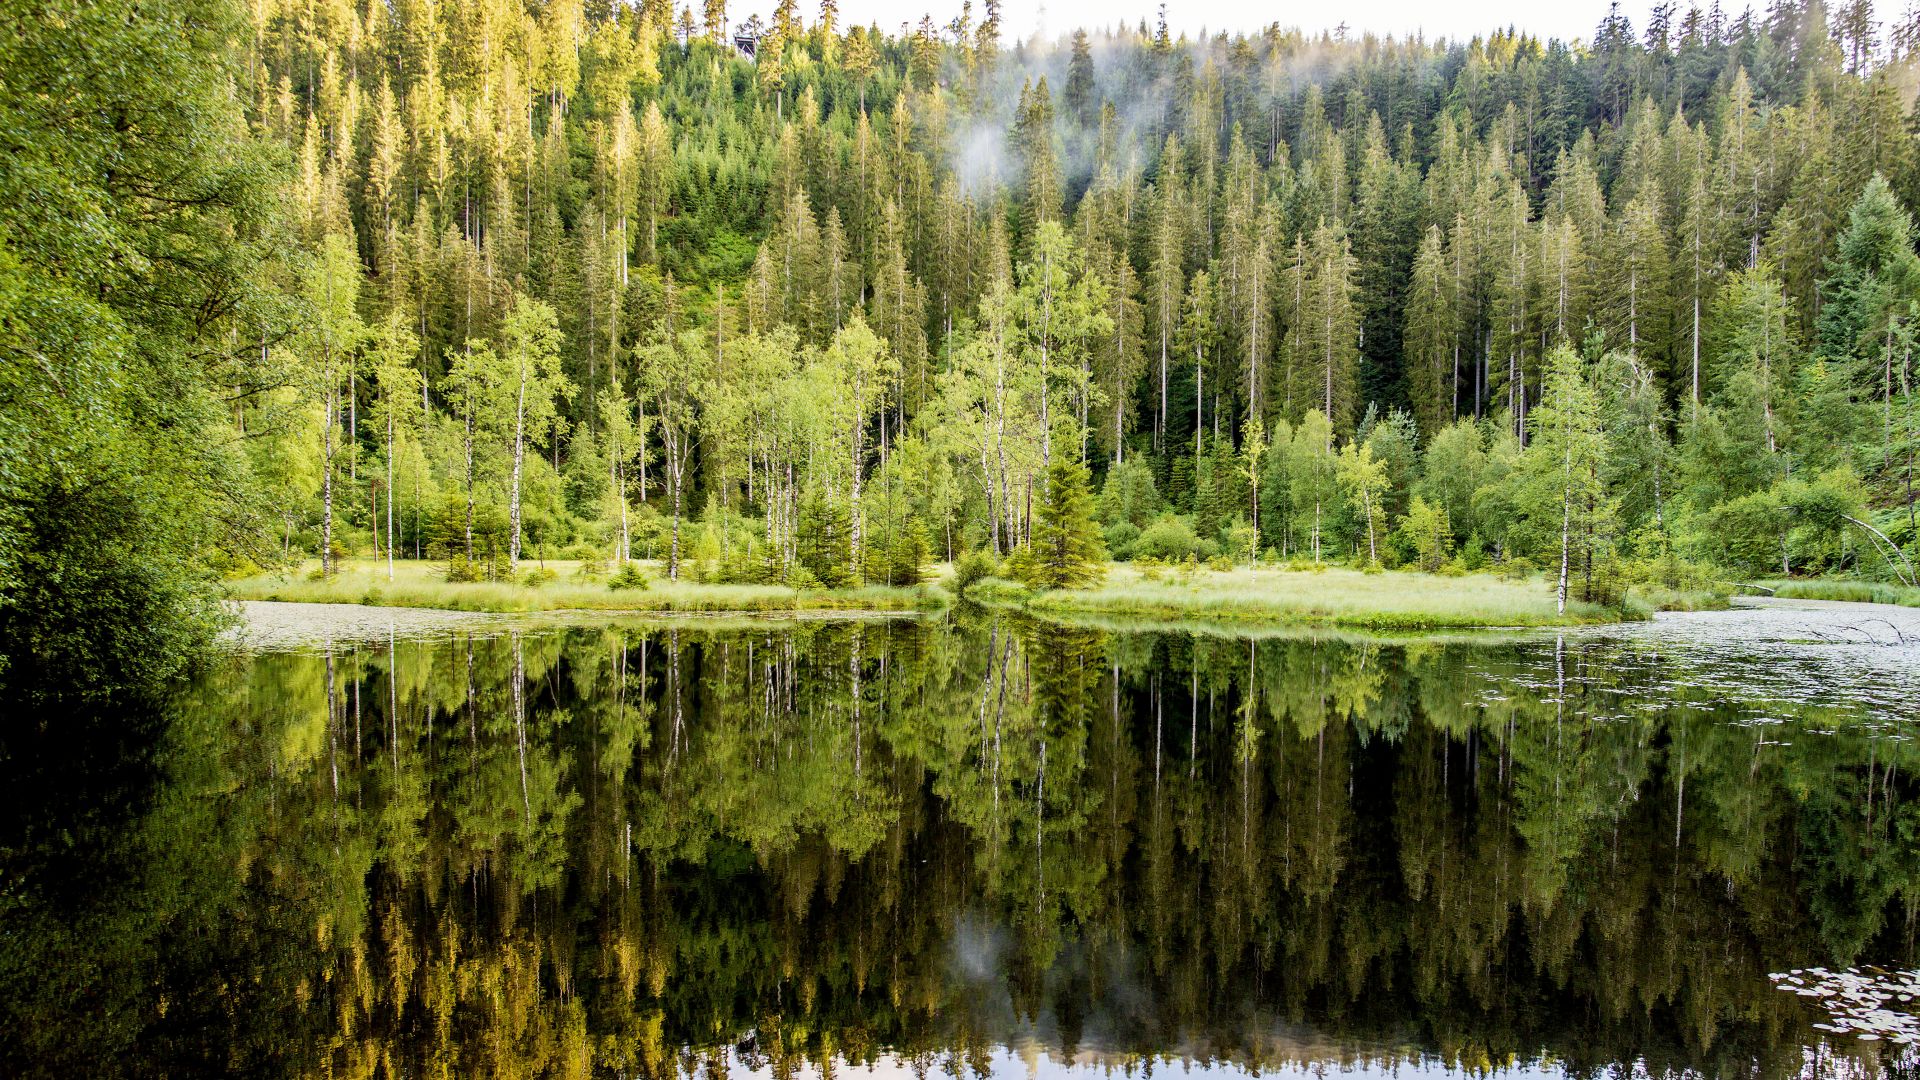 Upper Black Forest: A clear forest lake in the mountains